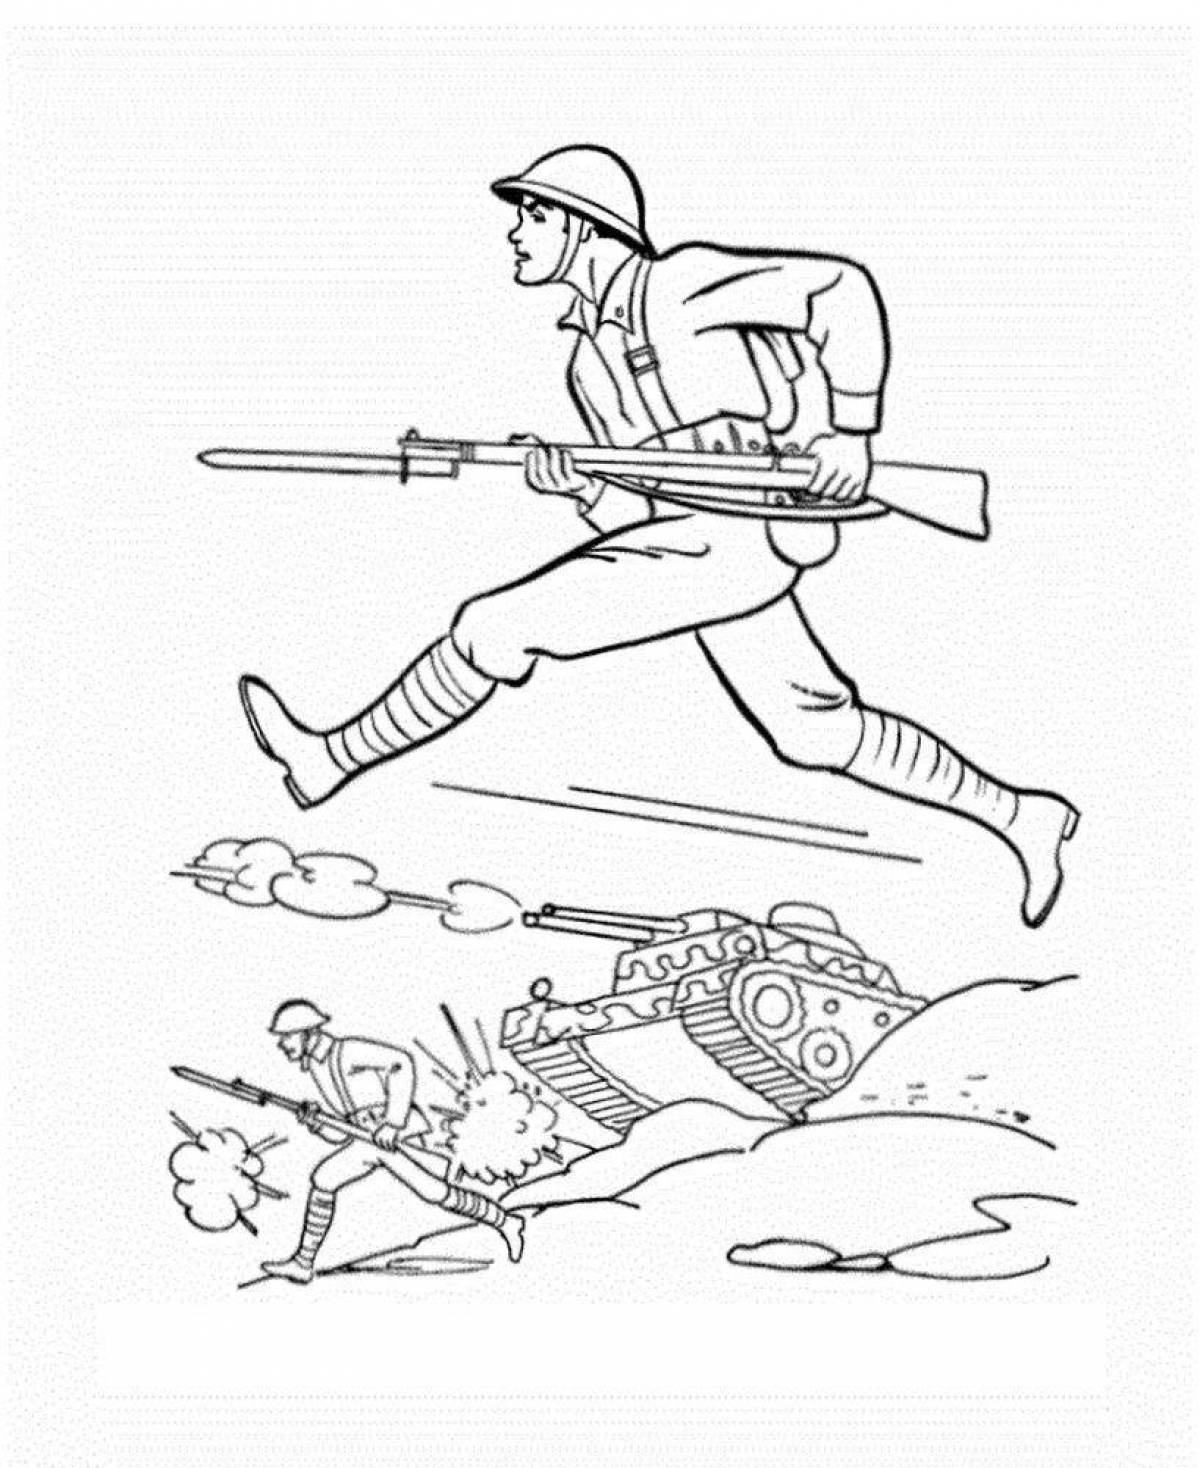 Playful army drawing of children